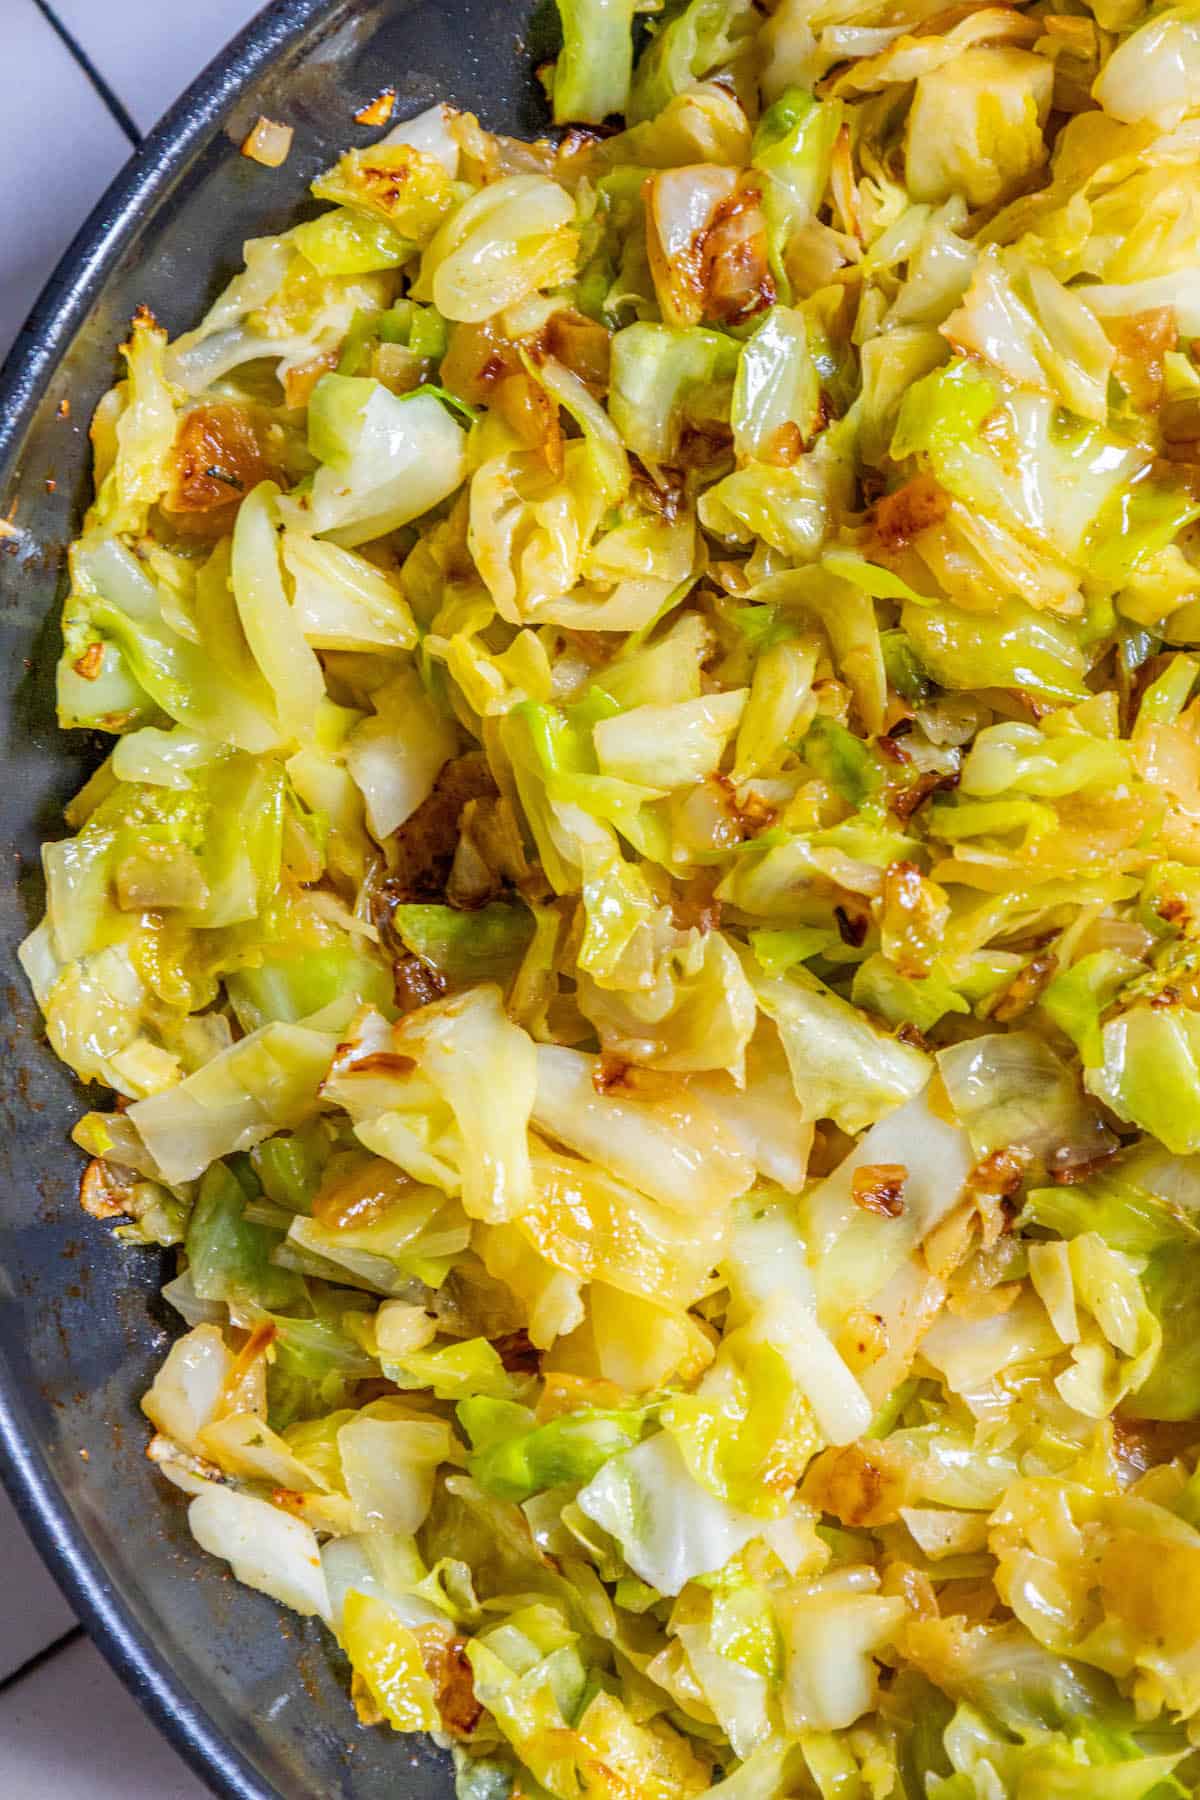 A classic saint patricks day cabbage recipe, this dish features sauteed cabbage in a skillet.